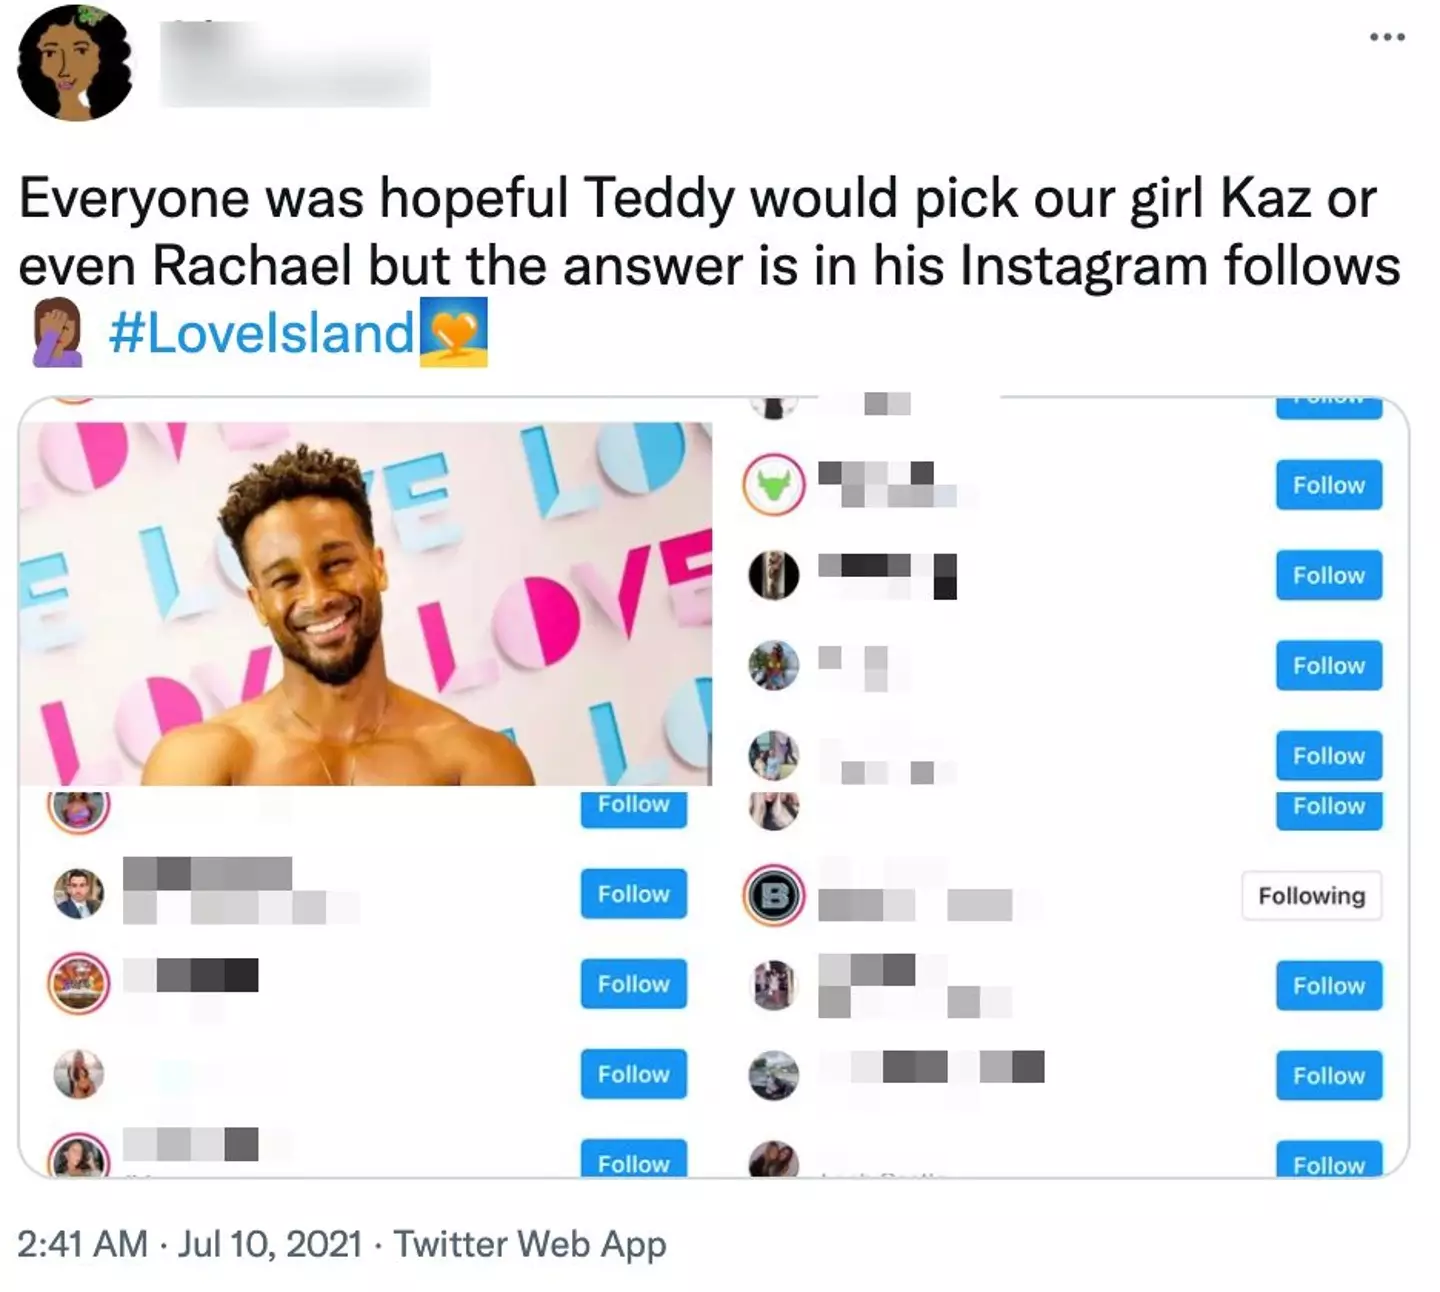 Love Island fans investigate the male Islander's types by looking at who they follow on Instagram (